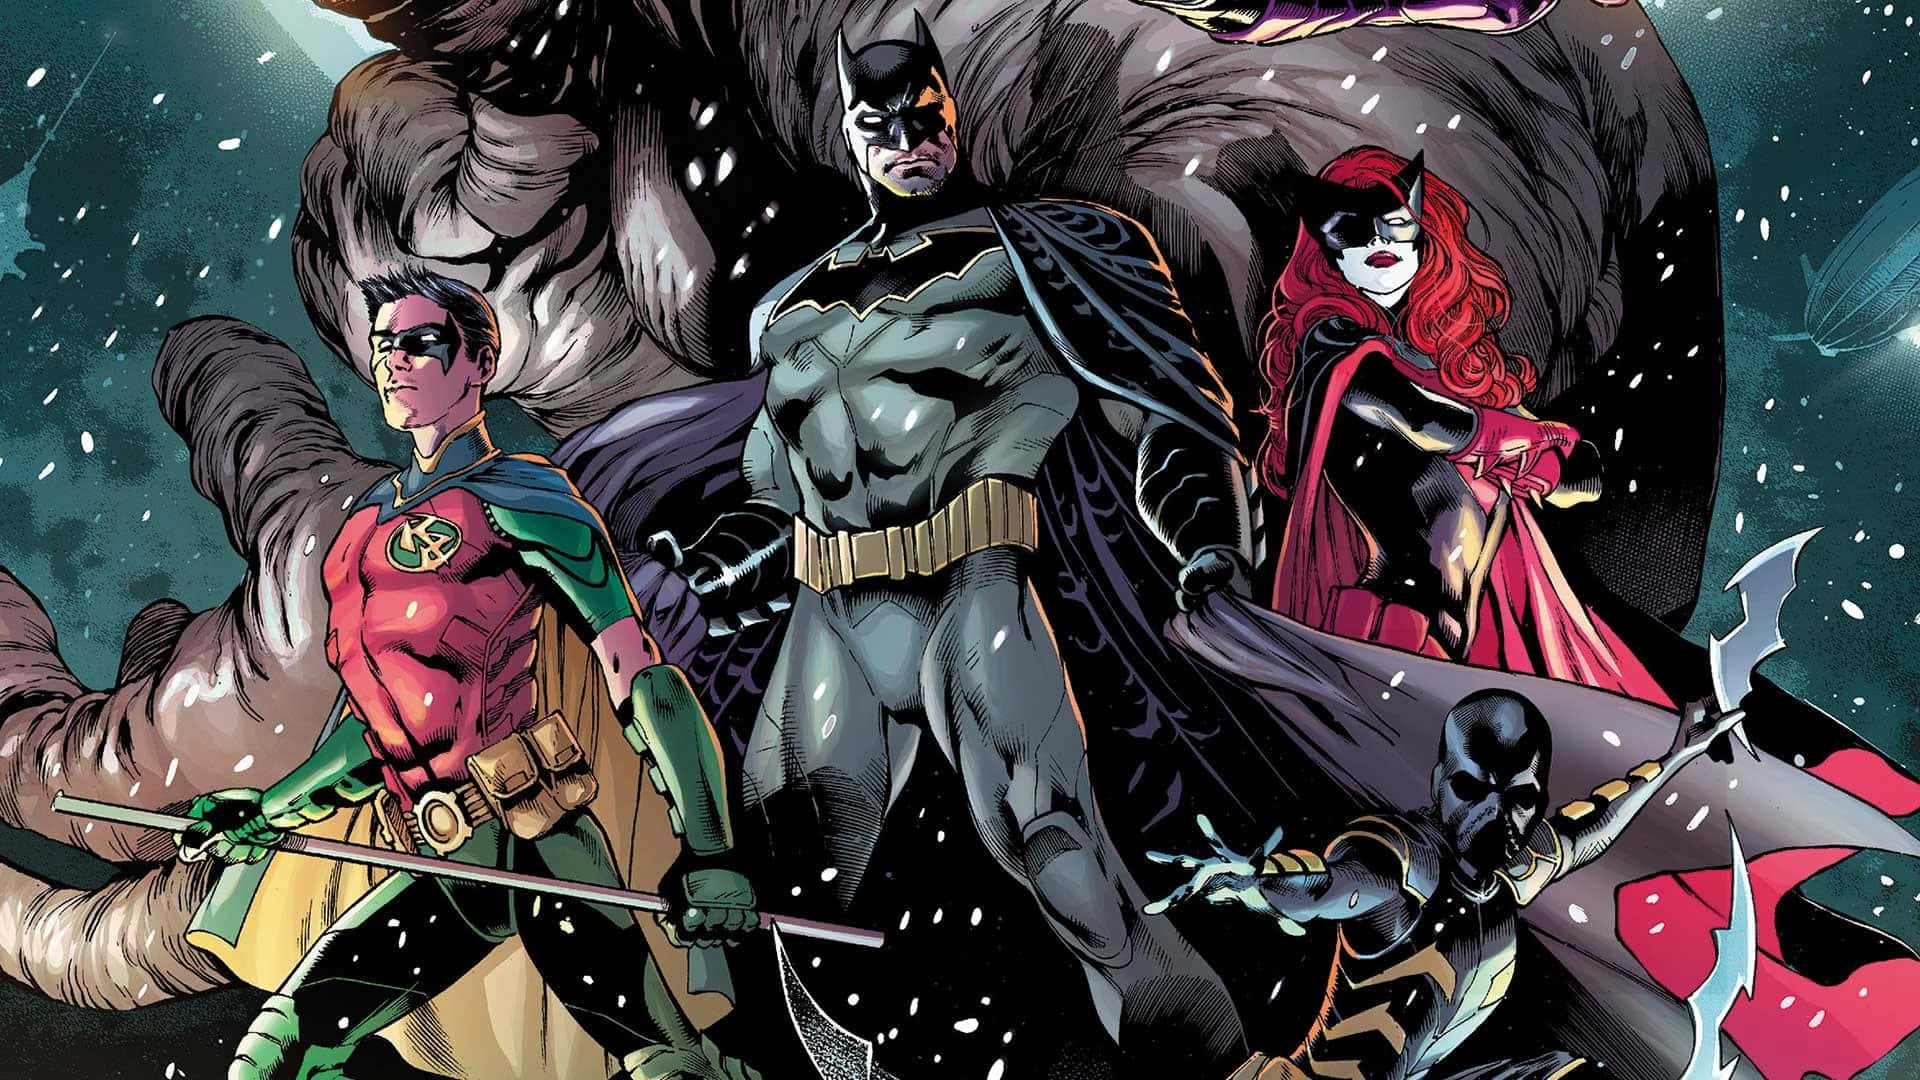 United Bat-Family - Batman, Nightwing, Batwoman, and others assemble in Gotham City. Wallpaper